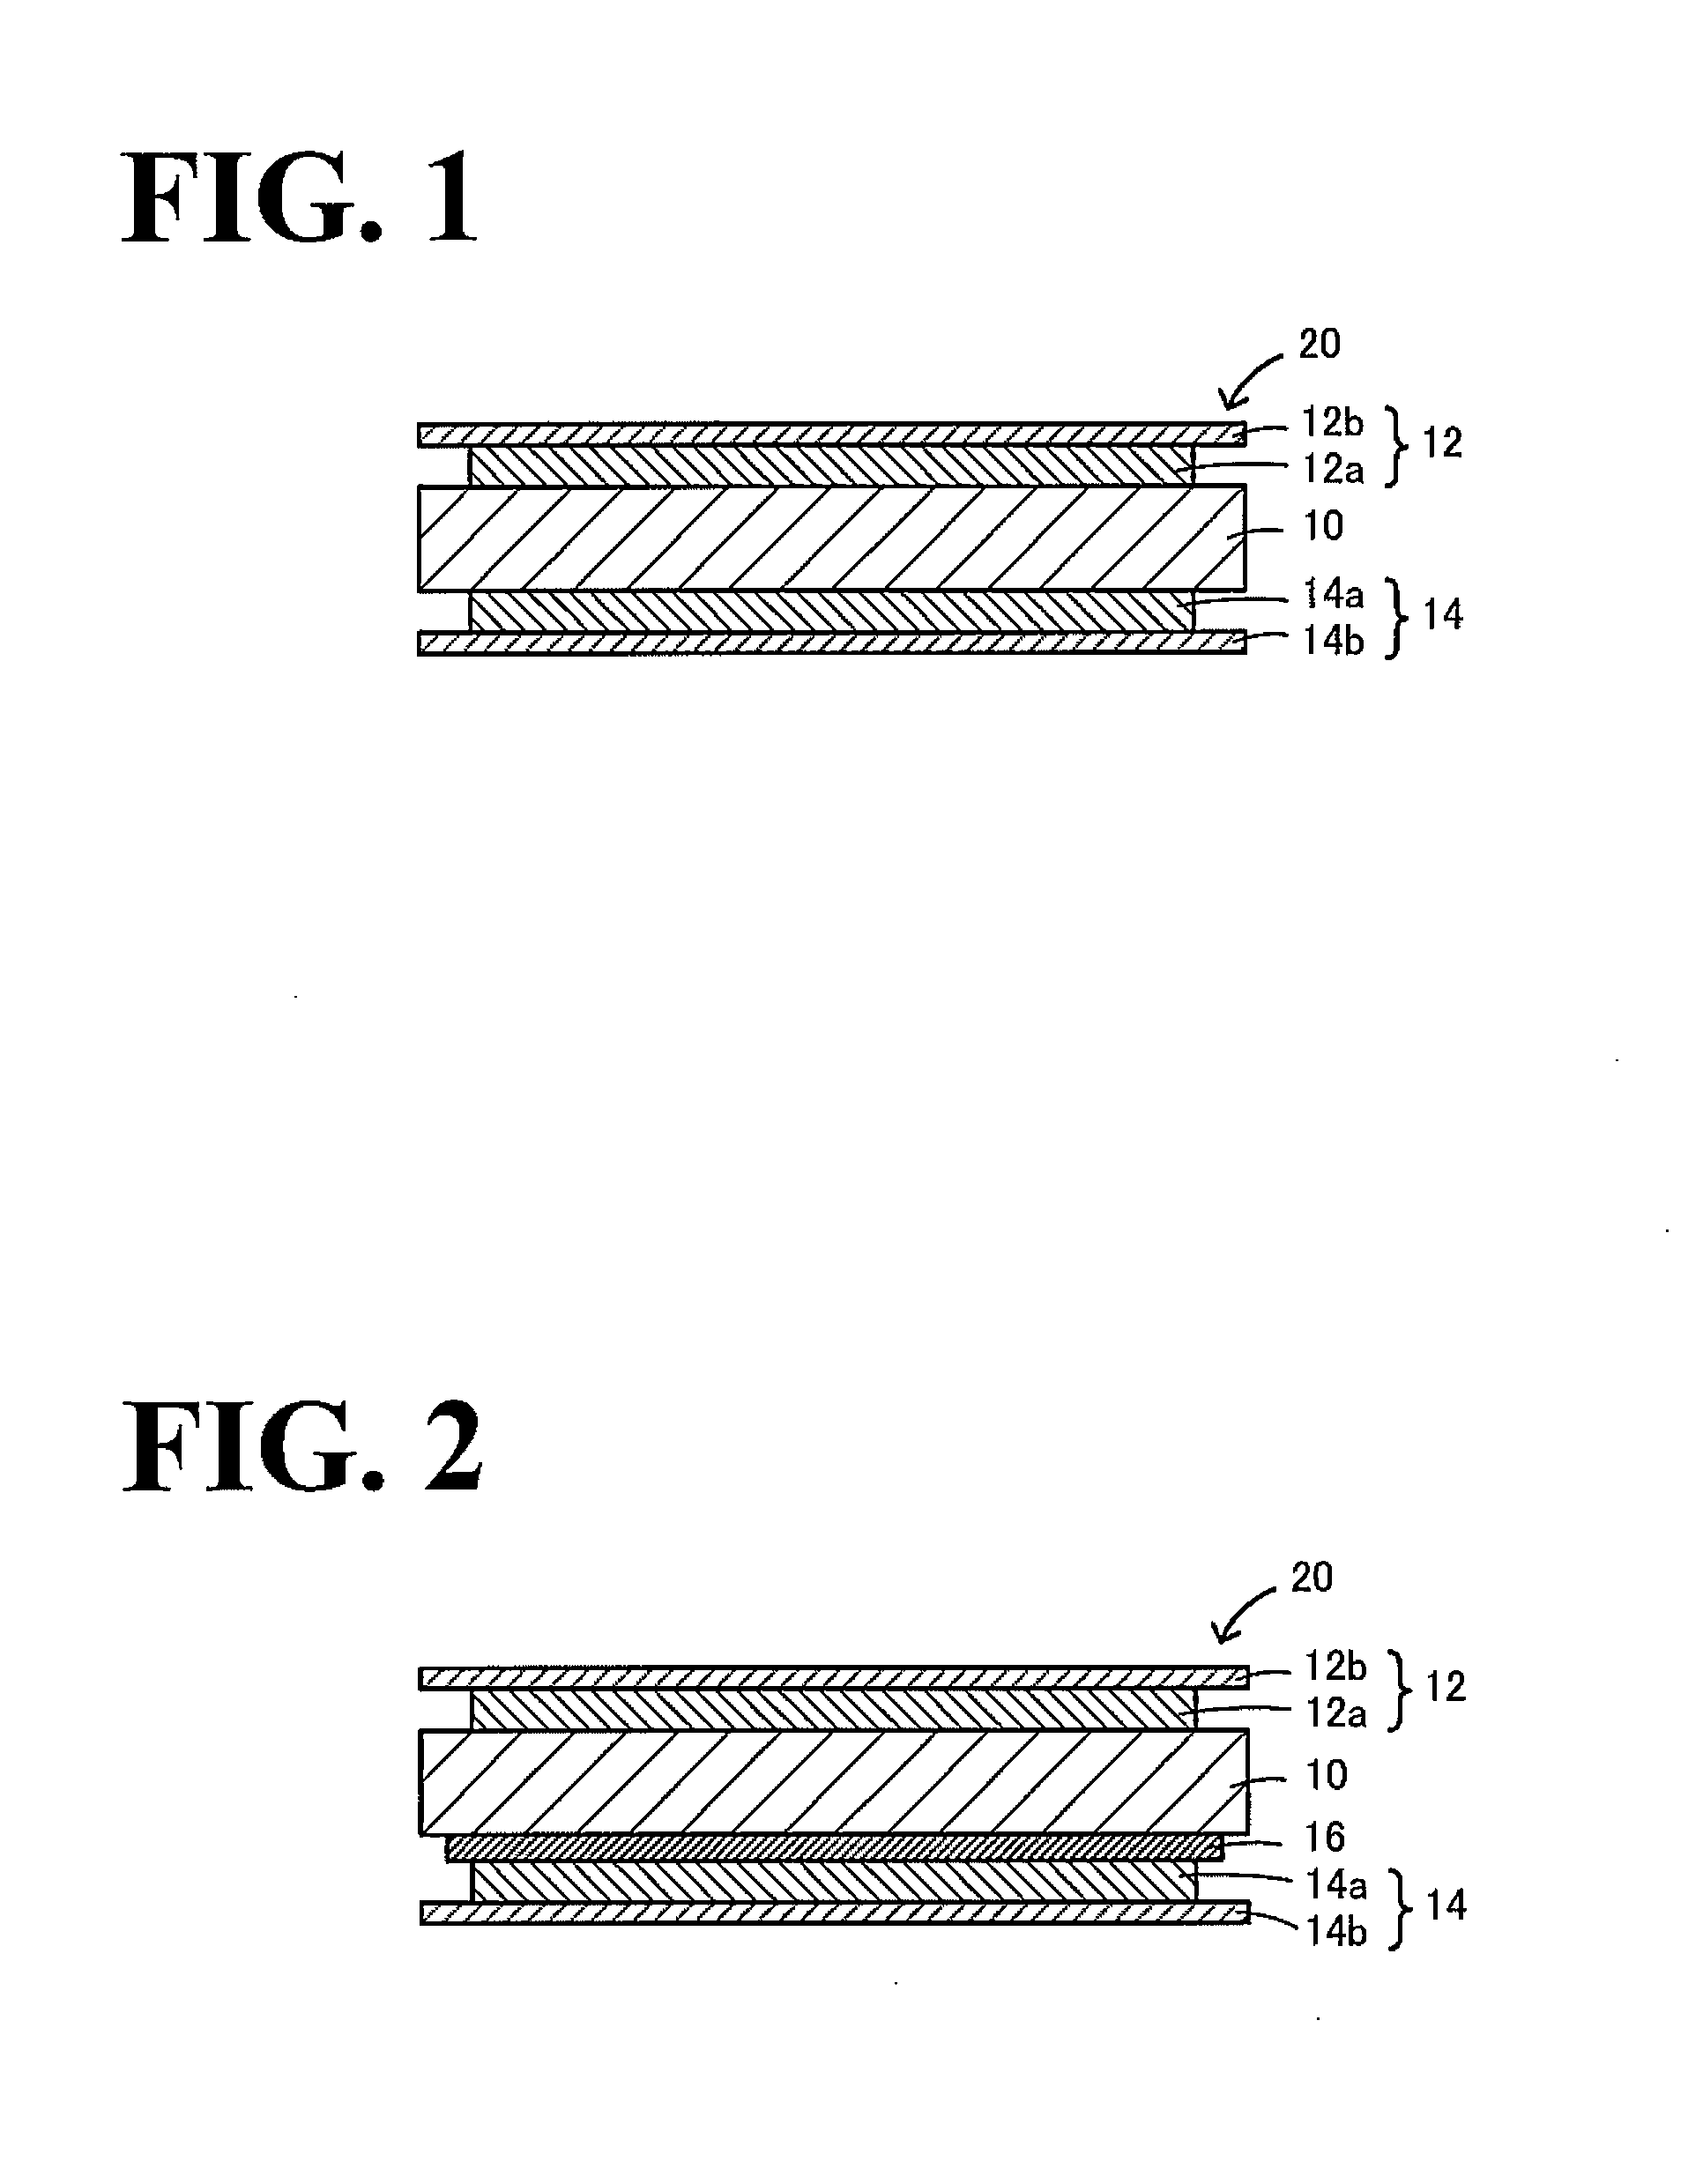 All-solid-state lithium secondary battery and method for producing the same